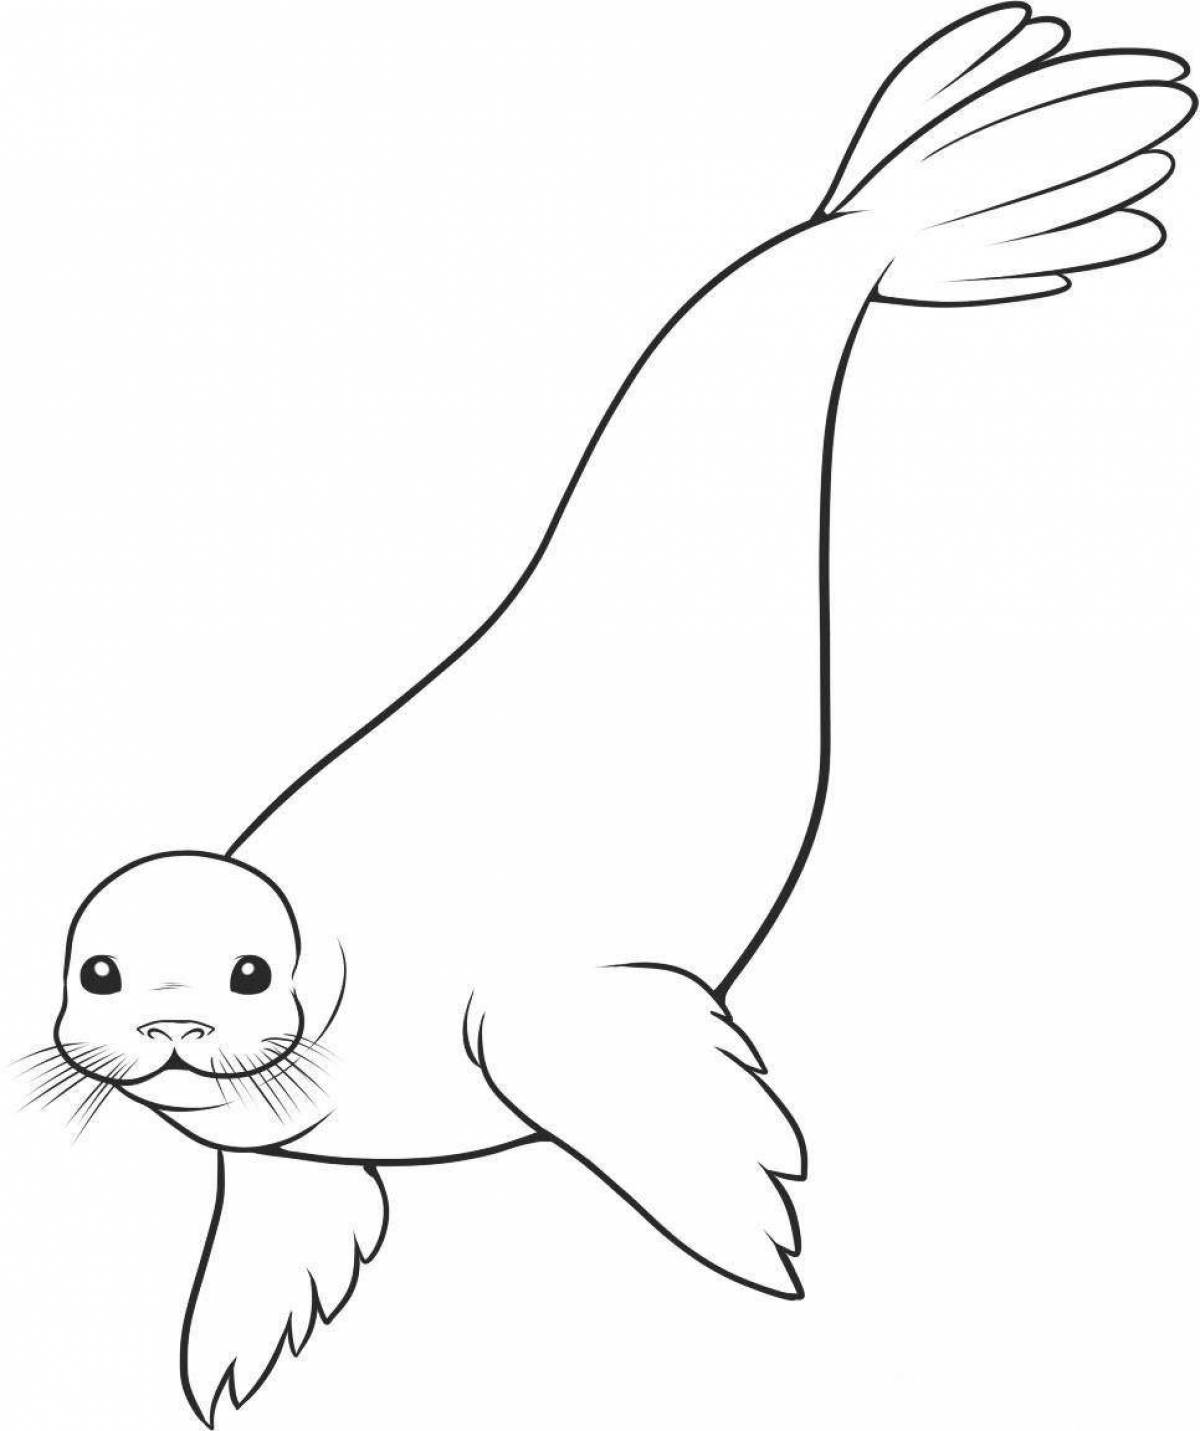 Playful harbor seal coloring page